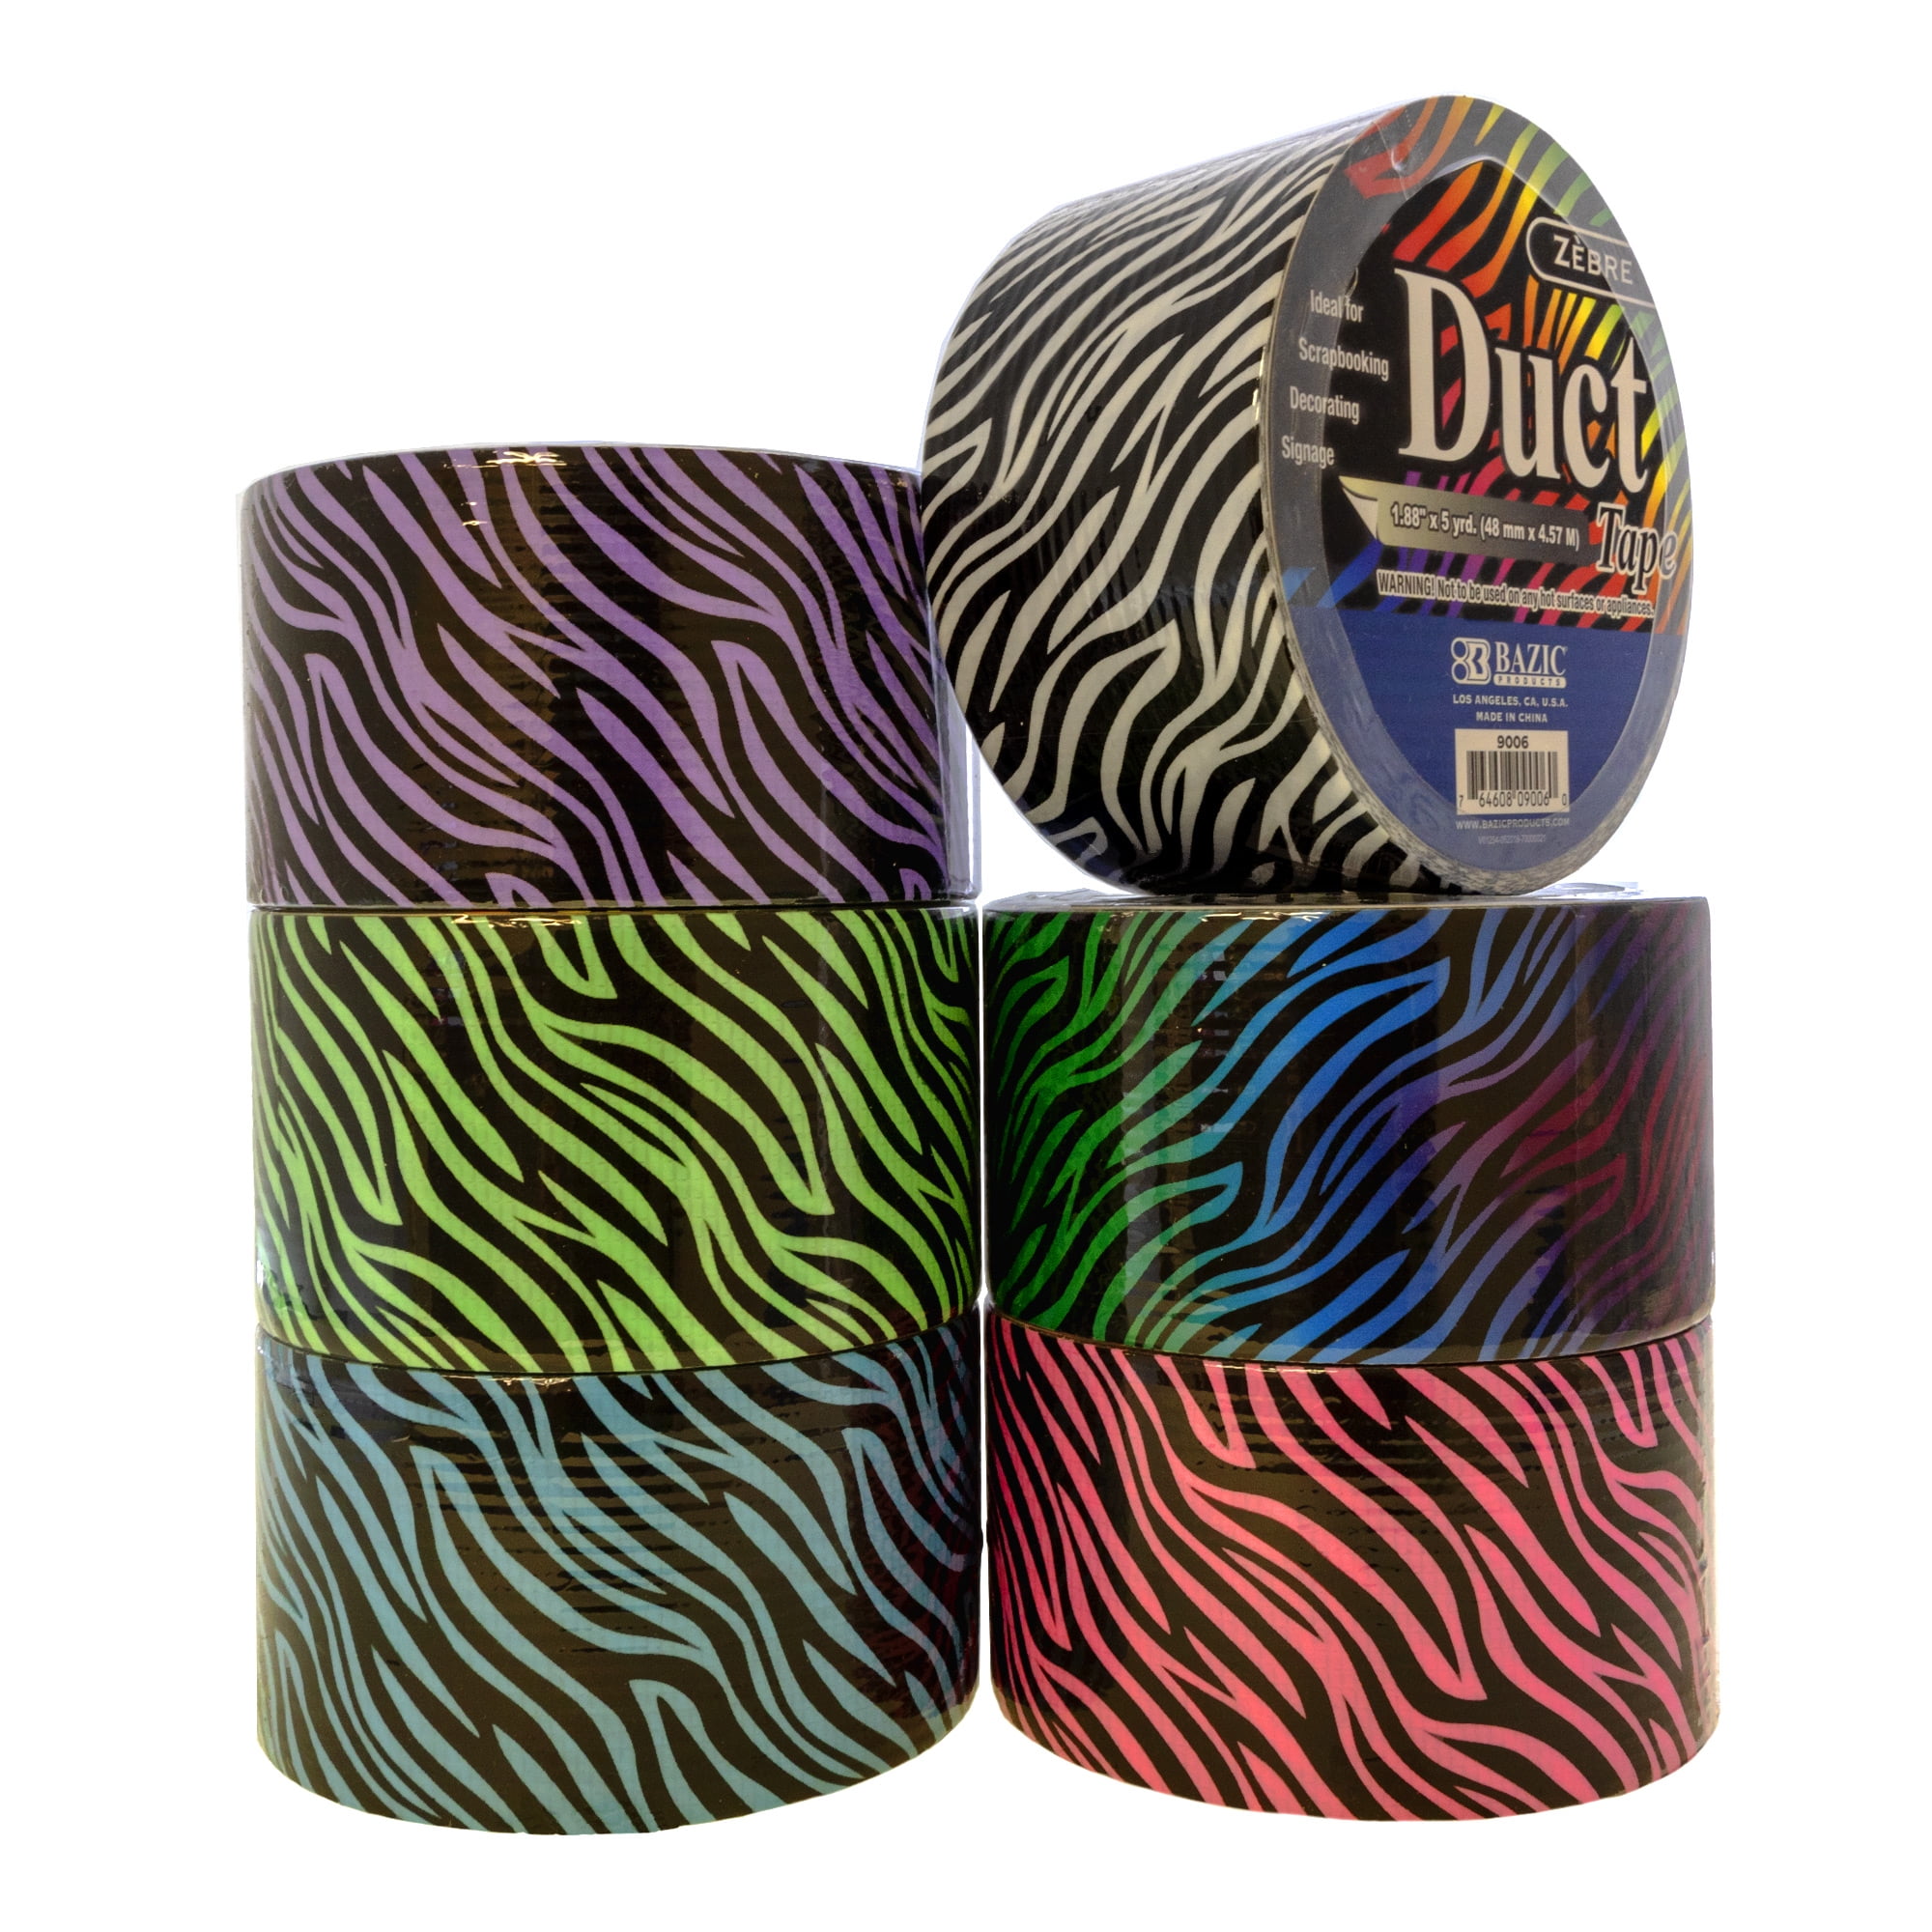 Bazic Fluorescent Colored Duct Tape, Assorted Colors, Pack of 6